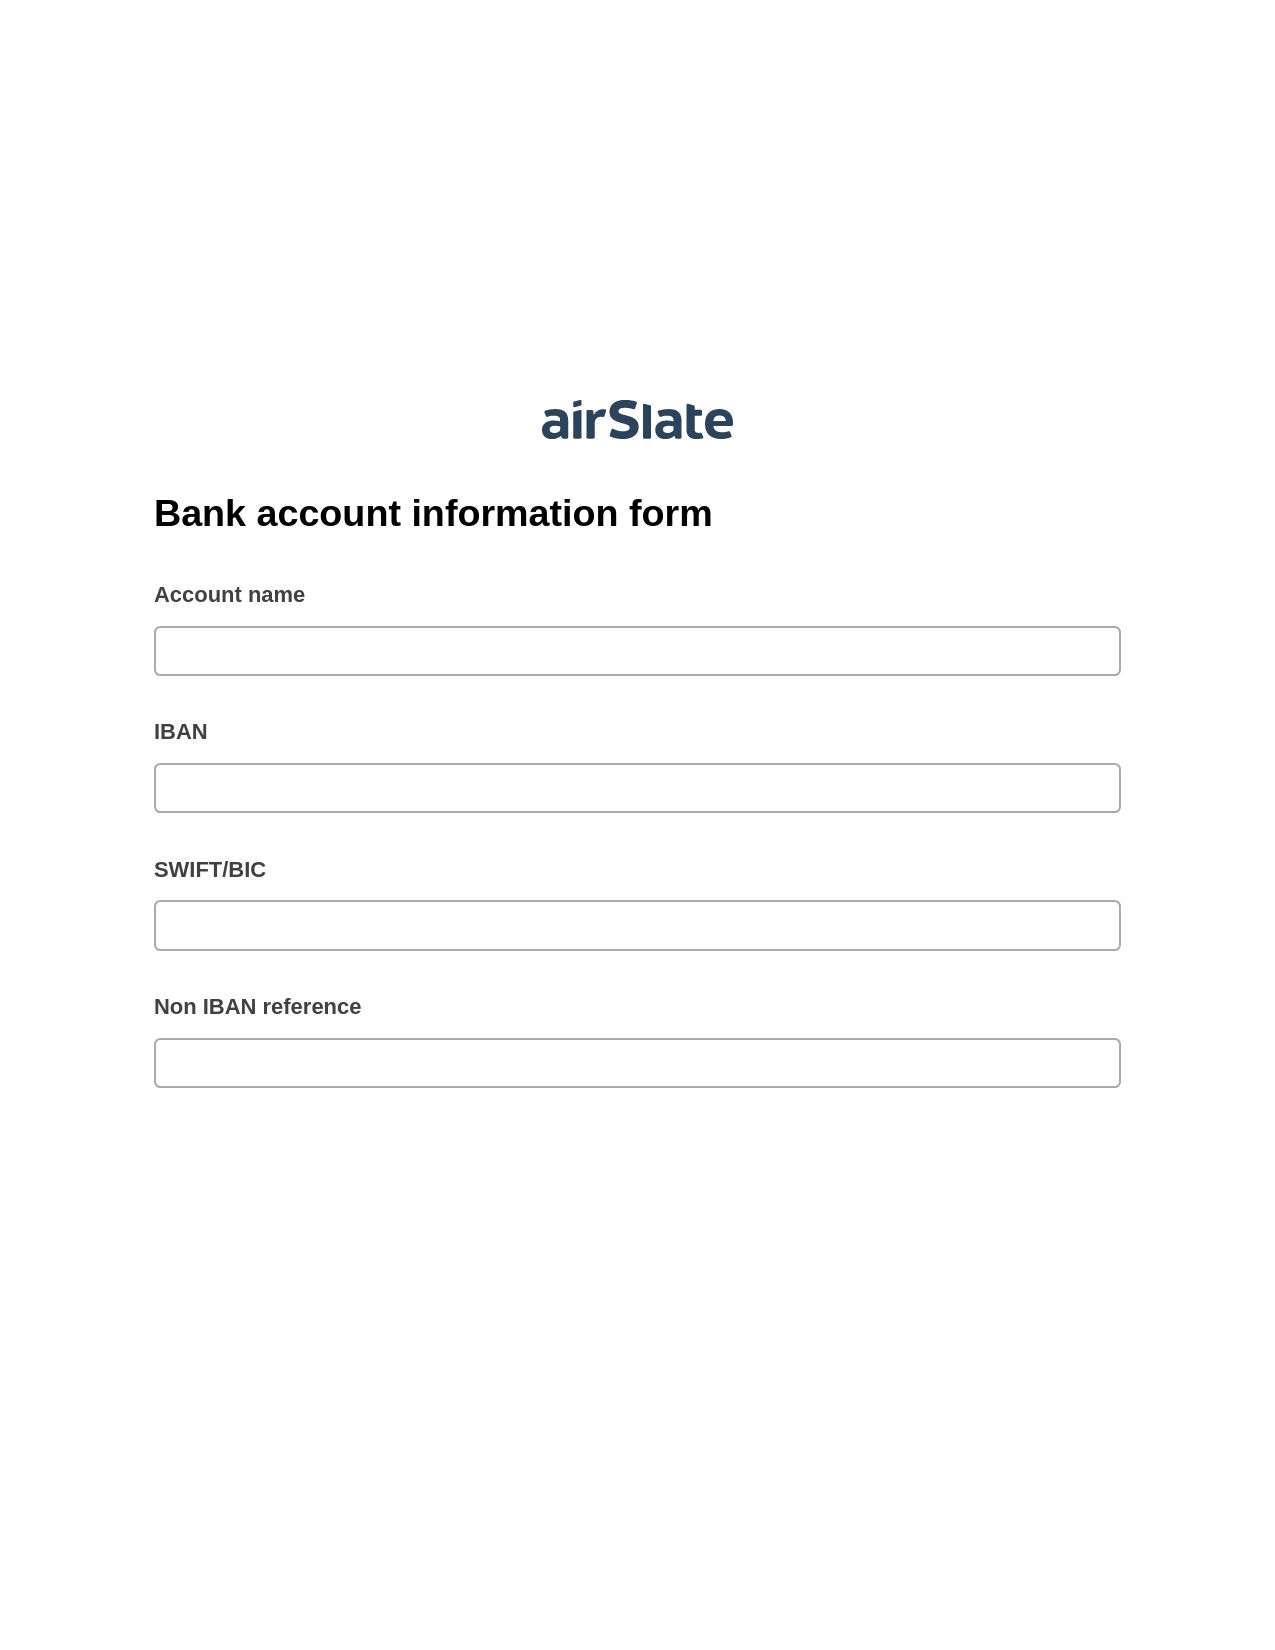 Multirole Bank account information form Pre-fill Slate from MS Dynamics 365 Records Bot, Update NetSuite Records Bot, OneDrive Bot